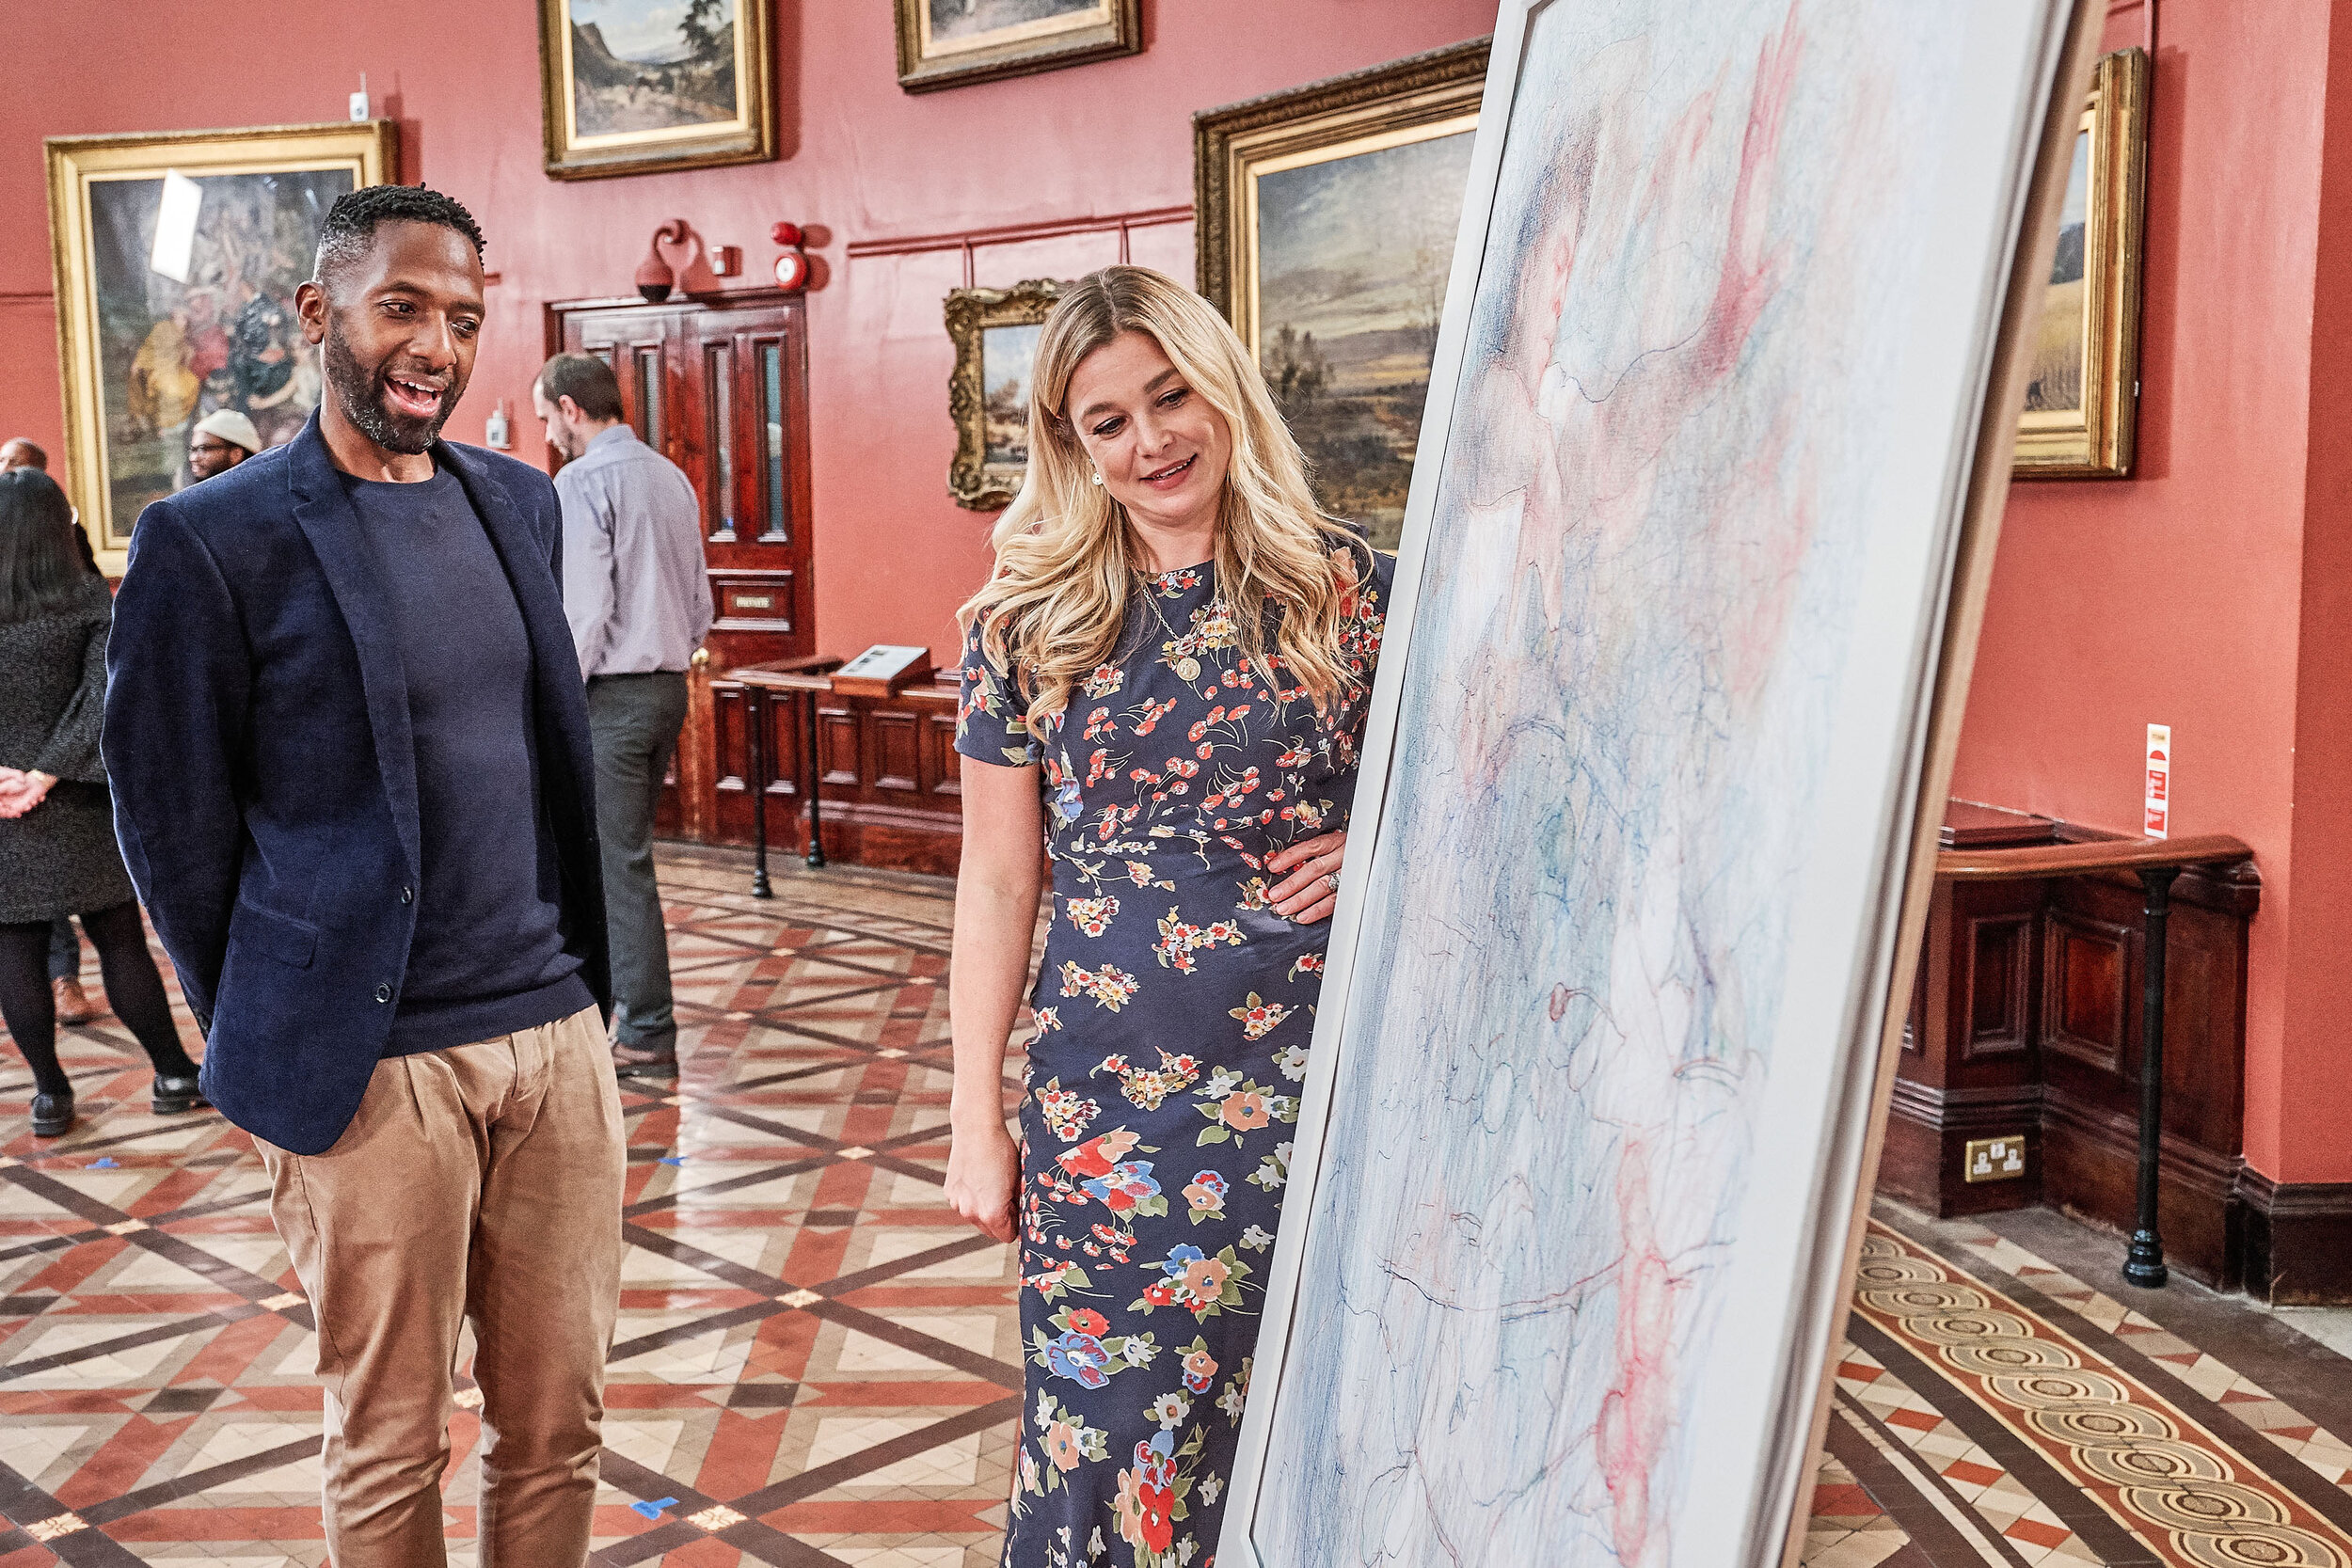 Sky Arts Portrait Artist of the Year judge Kate Bryan and winning artist Curtis Holder look at his portrait commission of ballet dancer Carlos Acosta at the Birmingham Museum and Art Gallery 